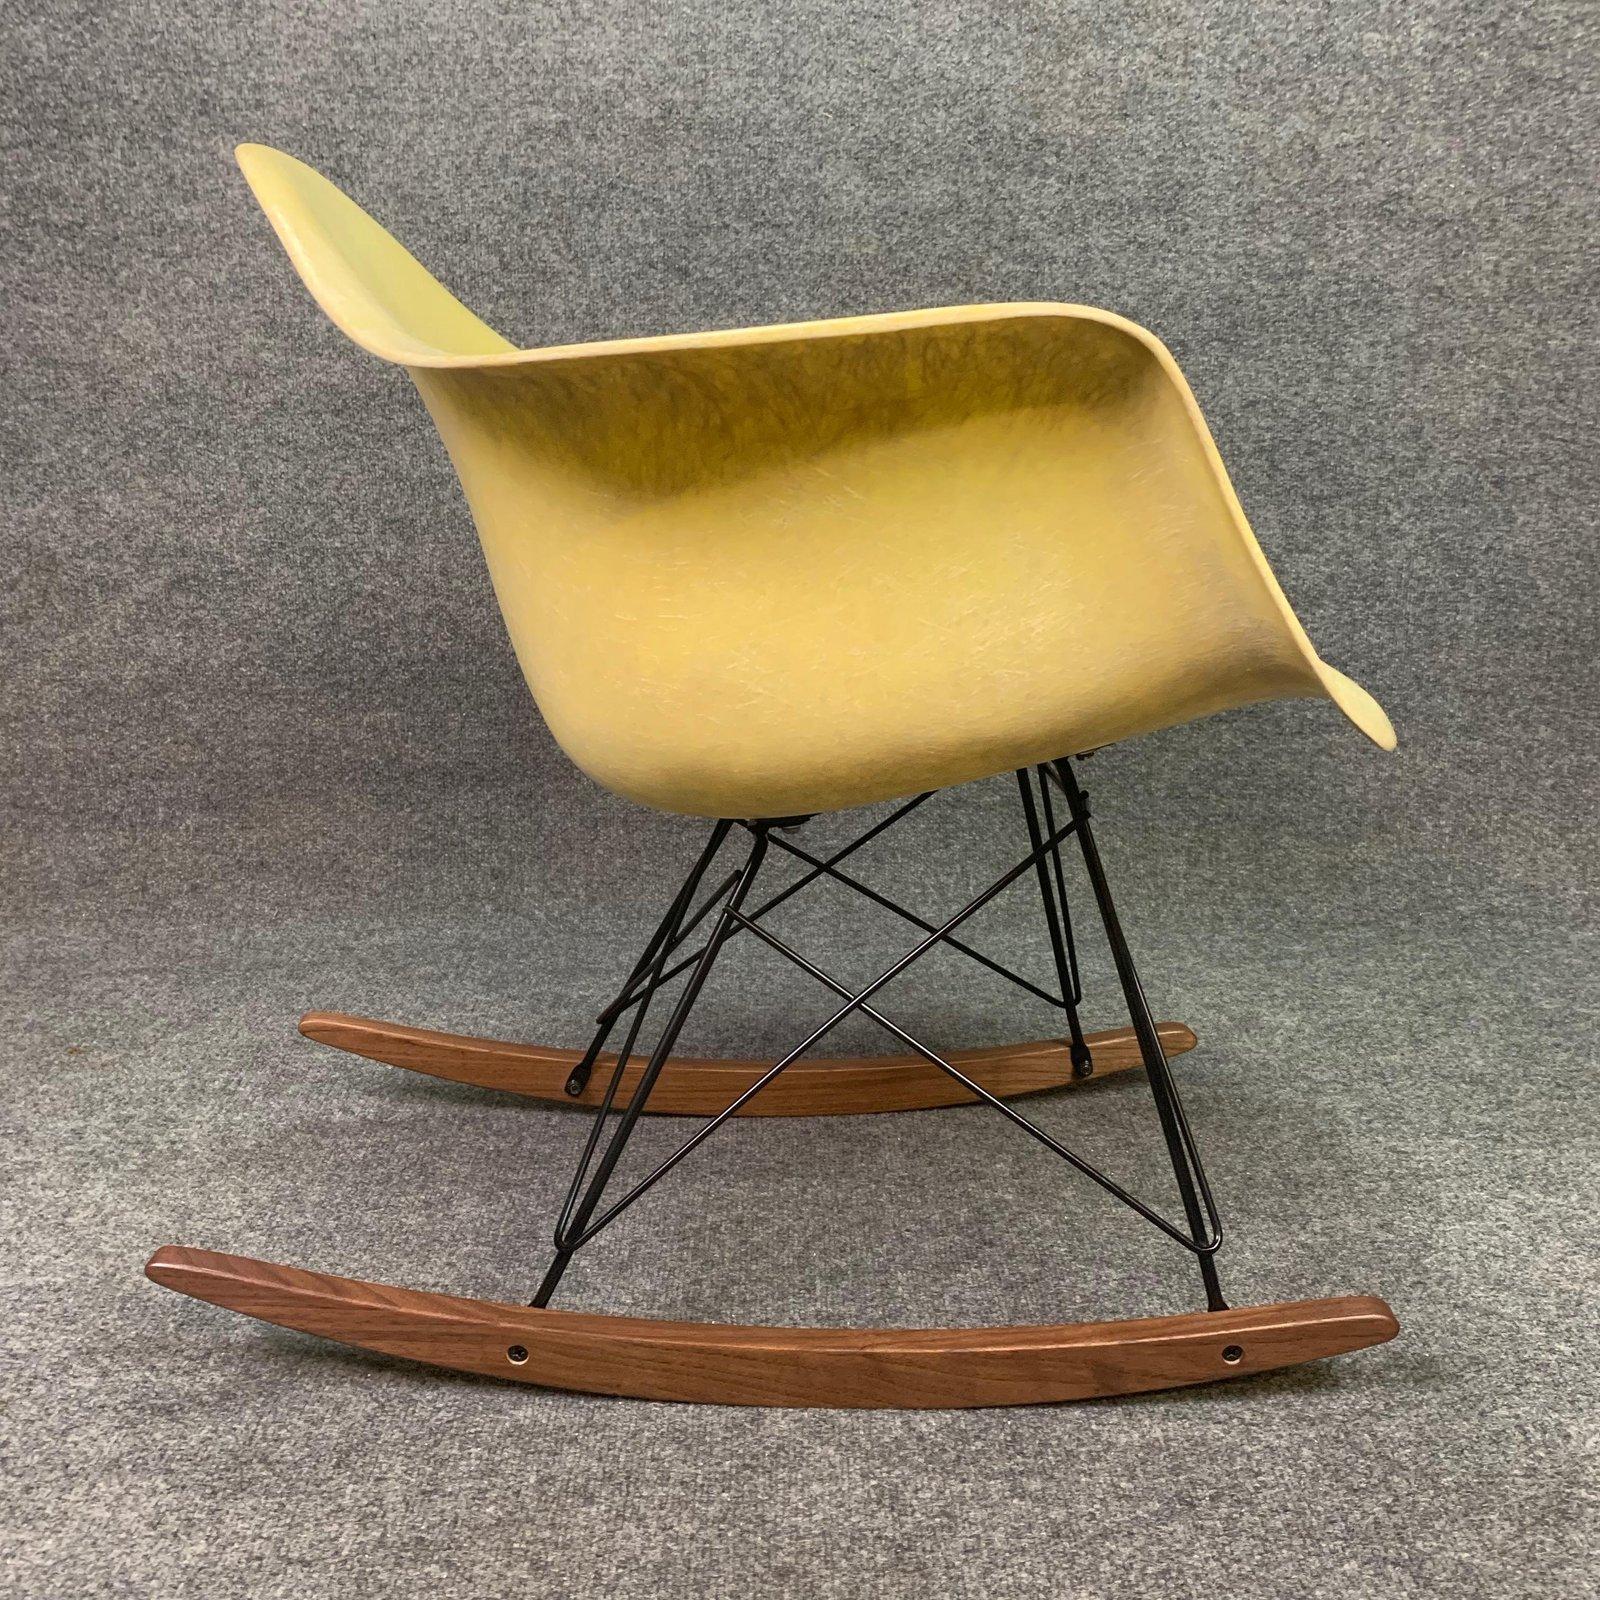 Vintage Mid Century Fiberglass Rocking Chair by Charles Eames 3